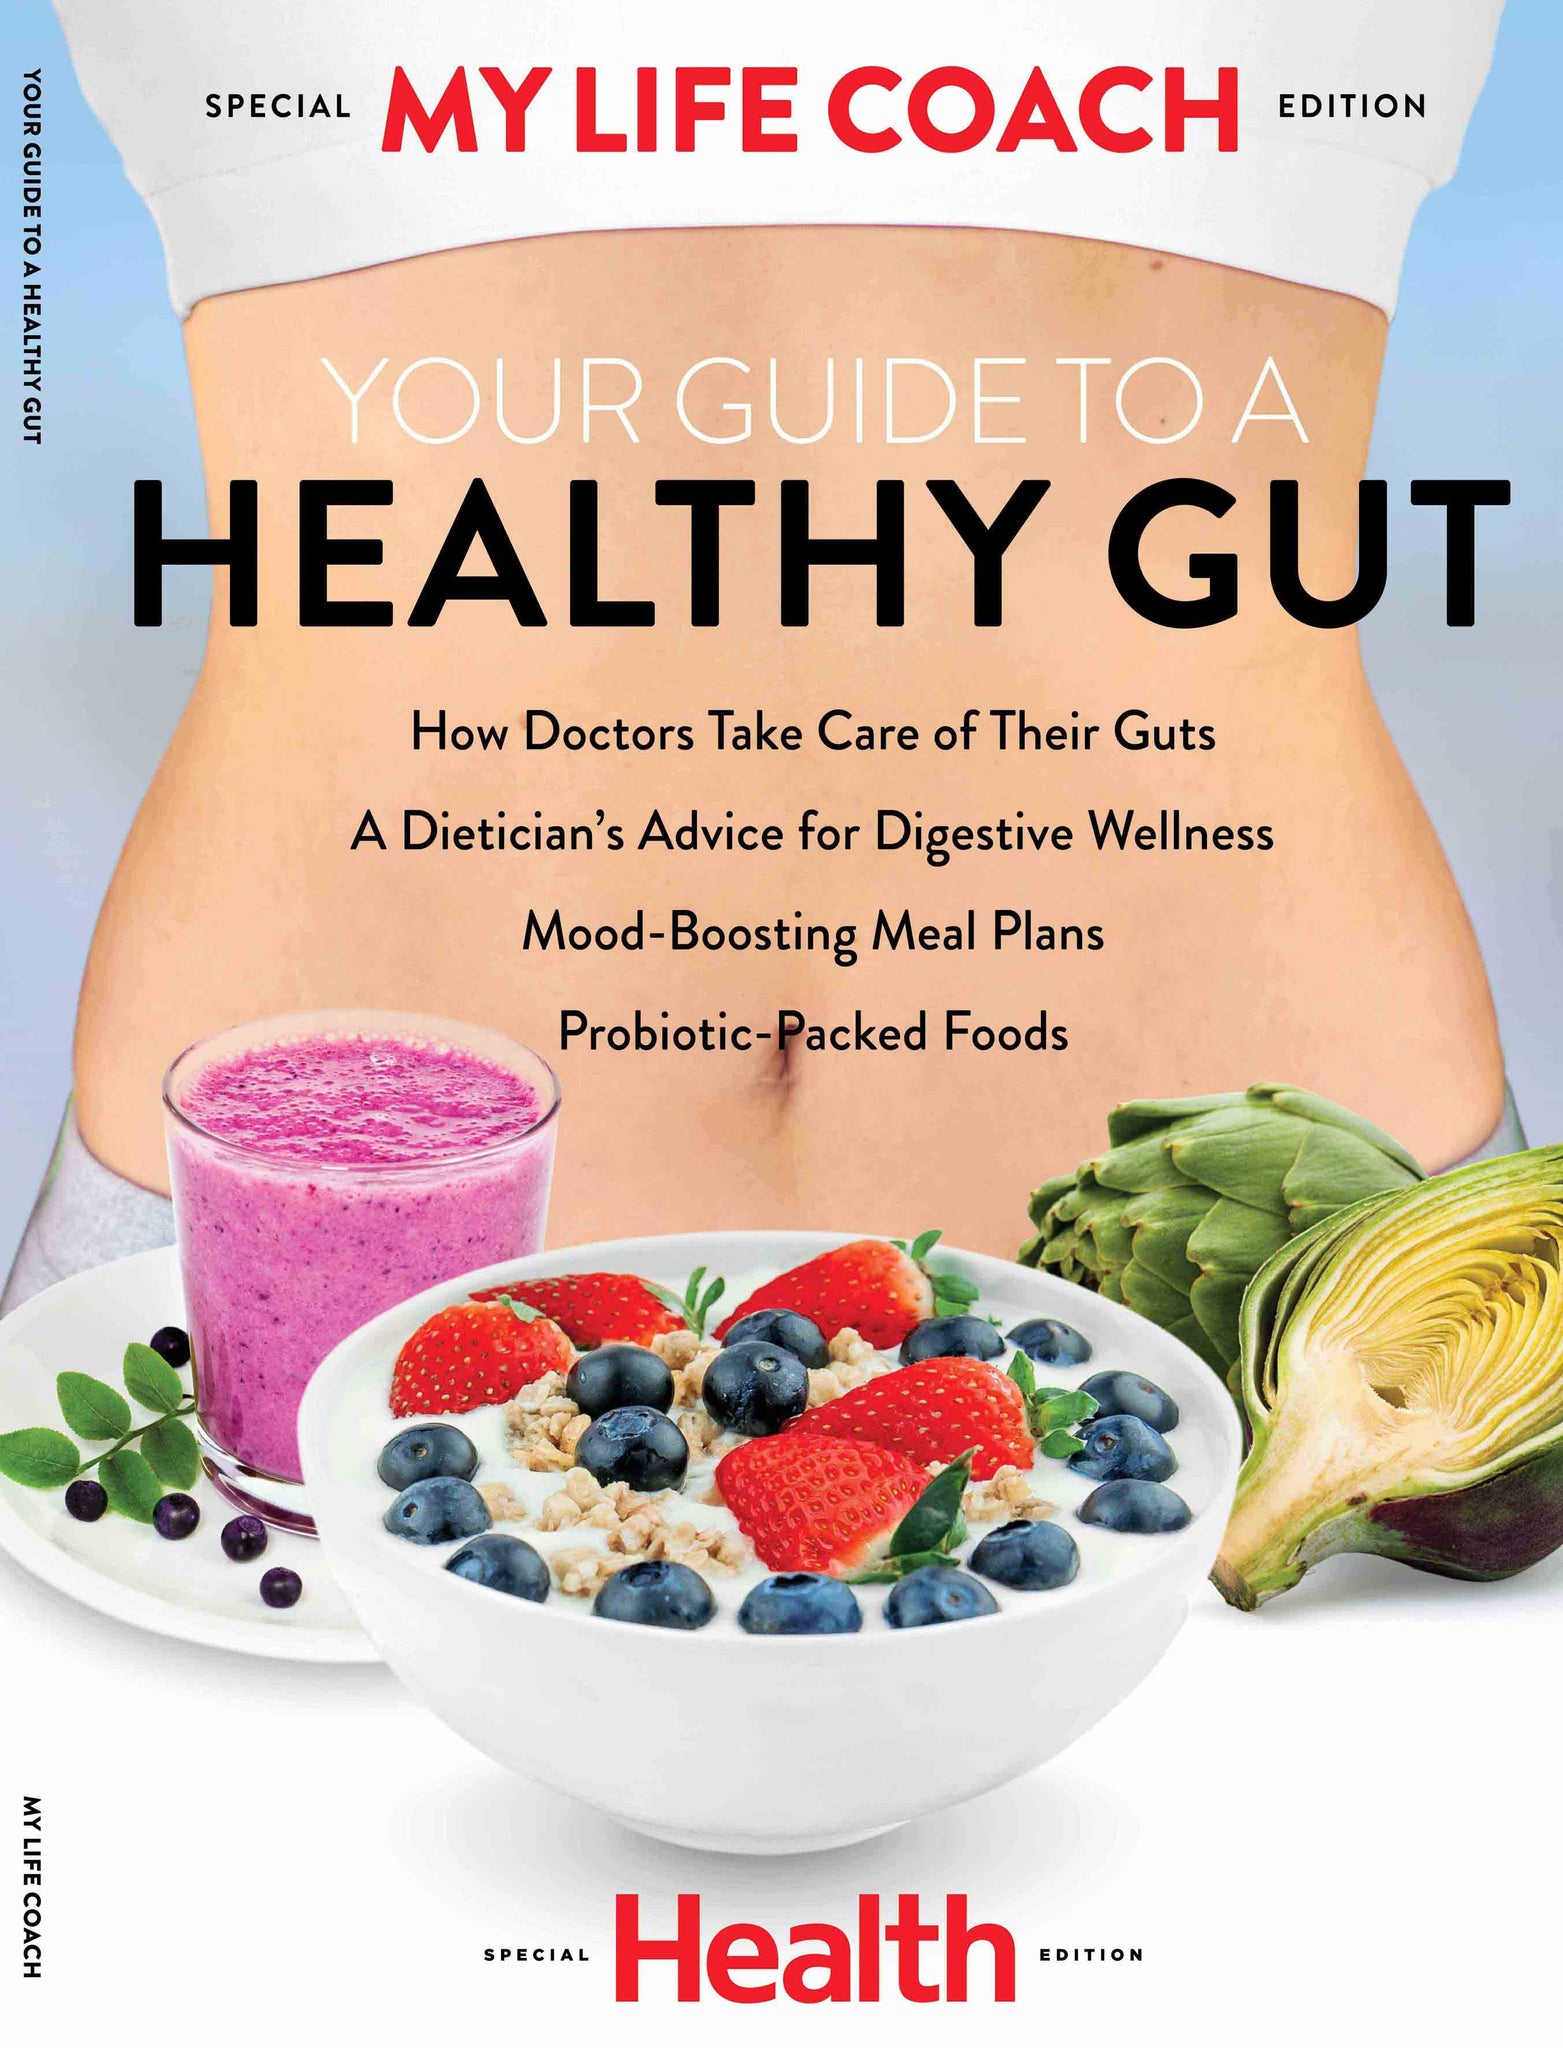 My Life Coach: Your Guide To A Healthy Gut